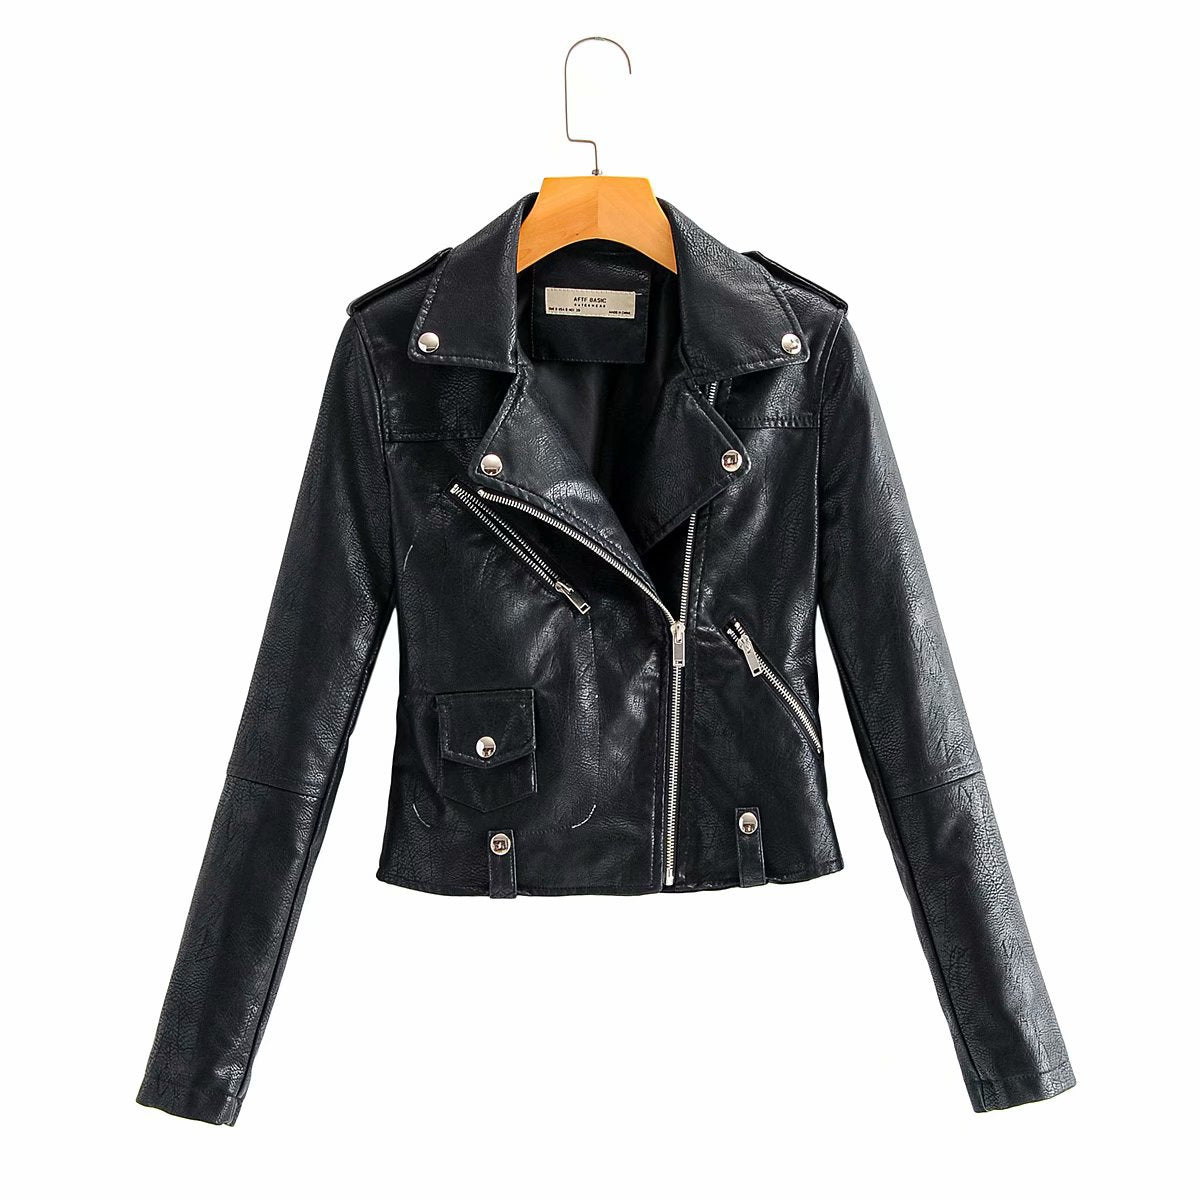 Leather Women's Short Fashion PU Small Slim Slim-fit Motorcycle Leather Jacket